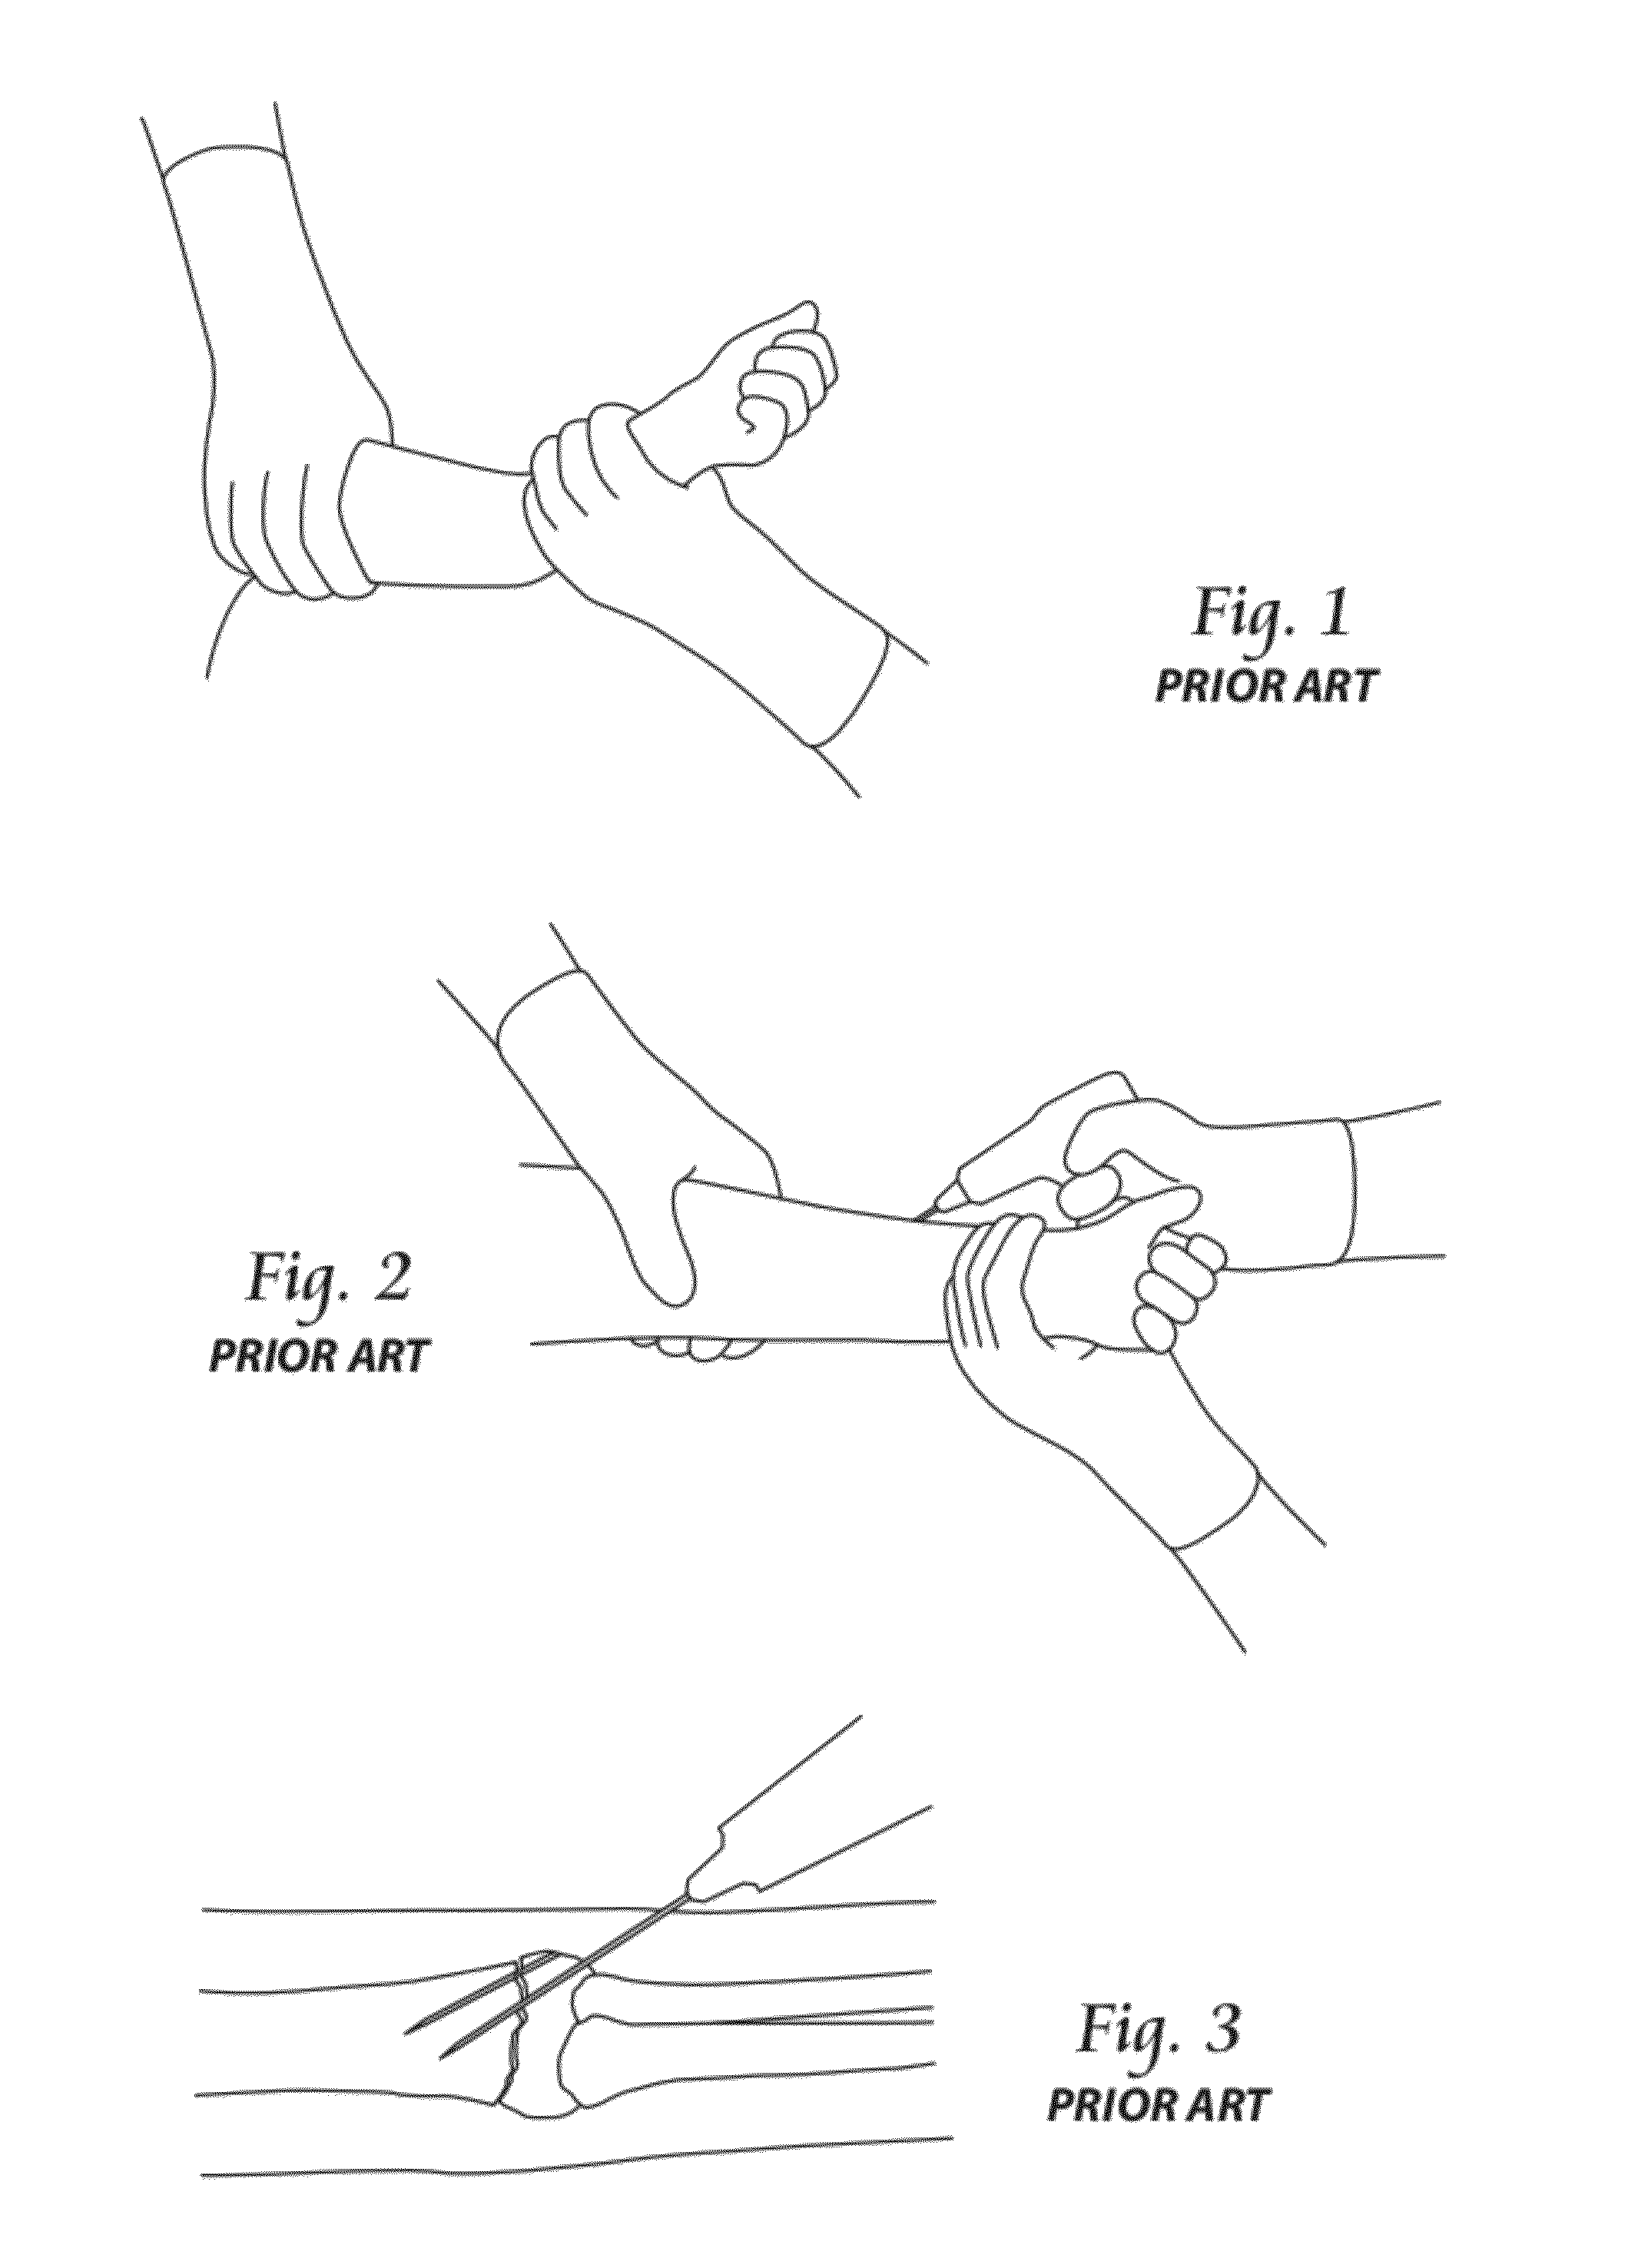 Systems, Devices, and Methods for Mechanically Reducing and Fixing Bone Fractures